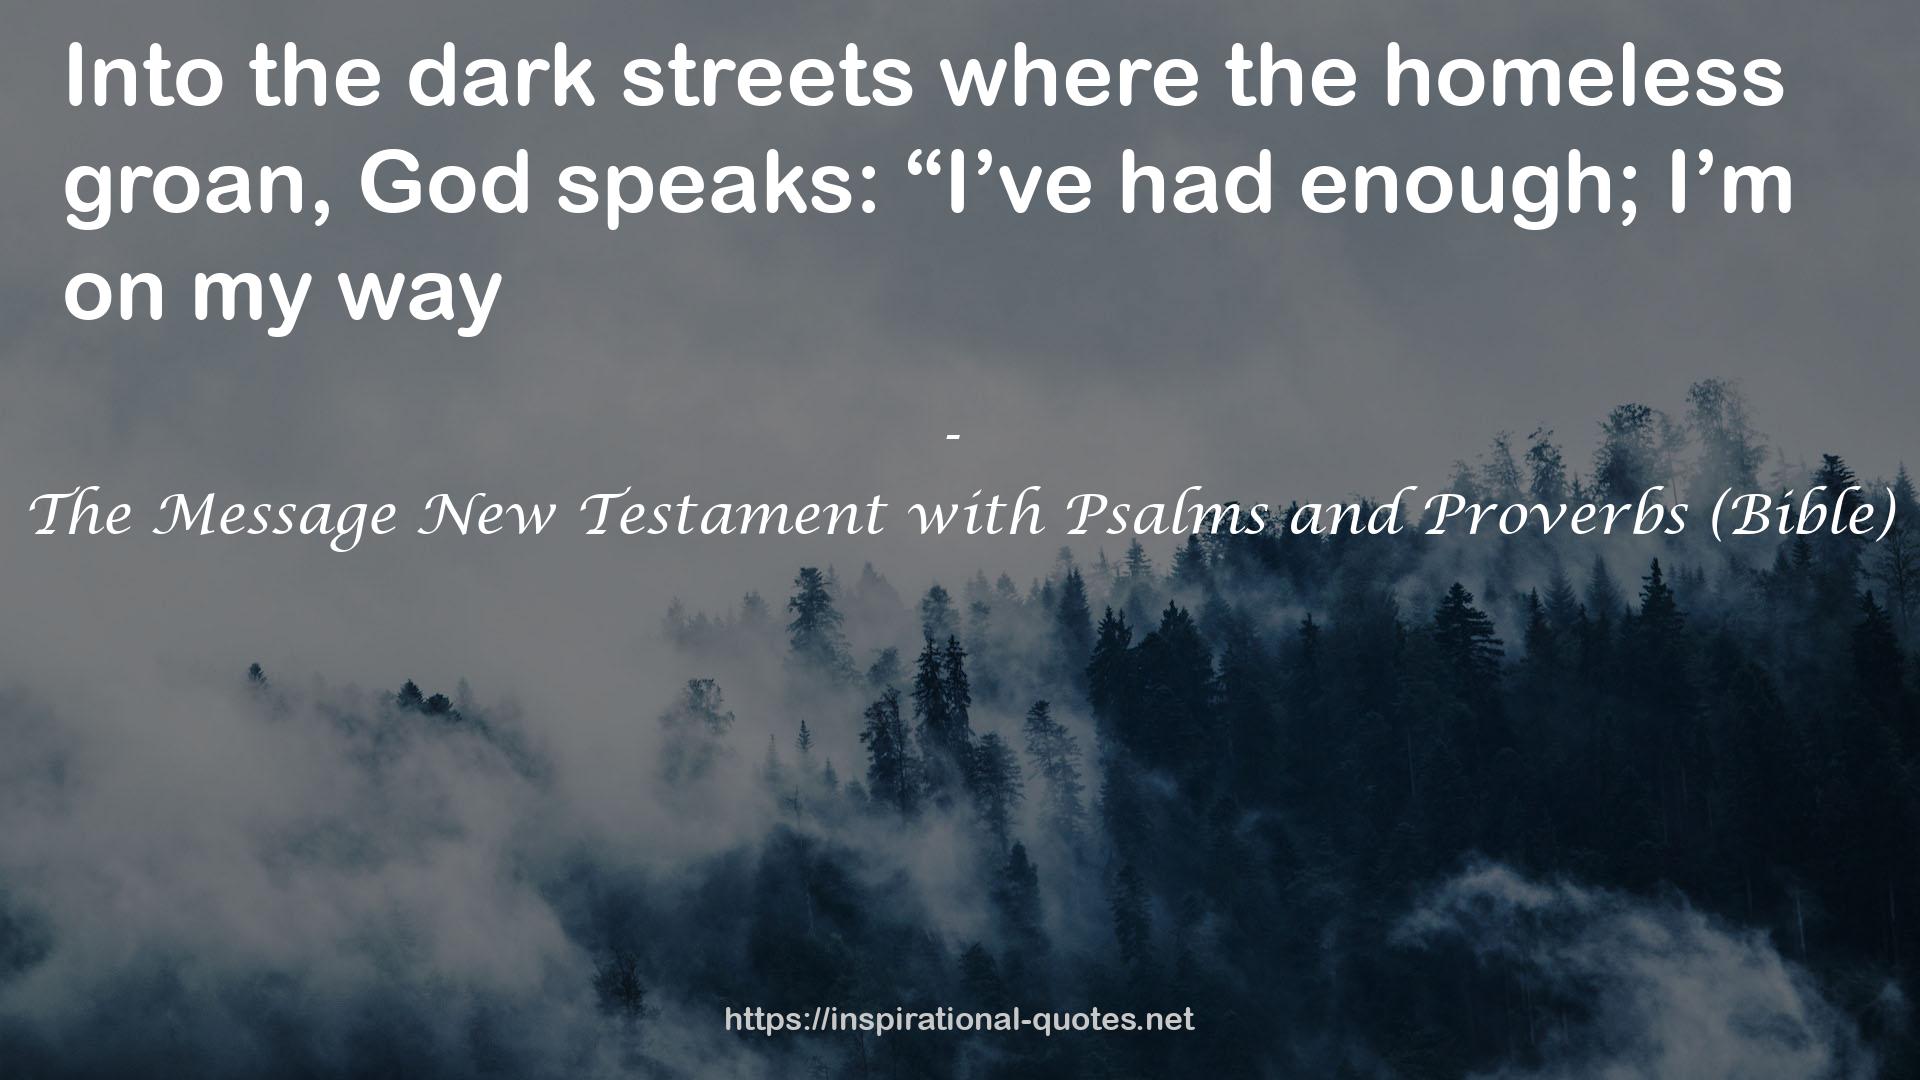 The Message New Testament with Psalms and Proverbs (Bible) QUOTES